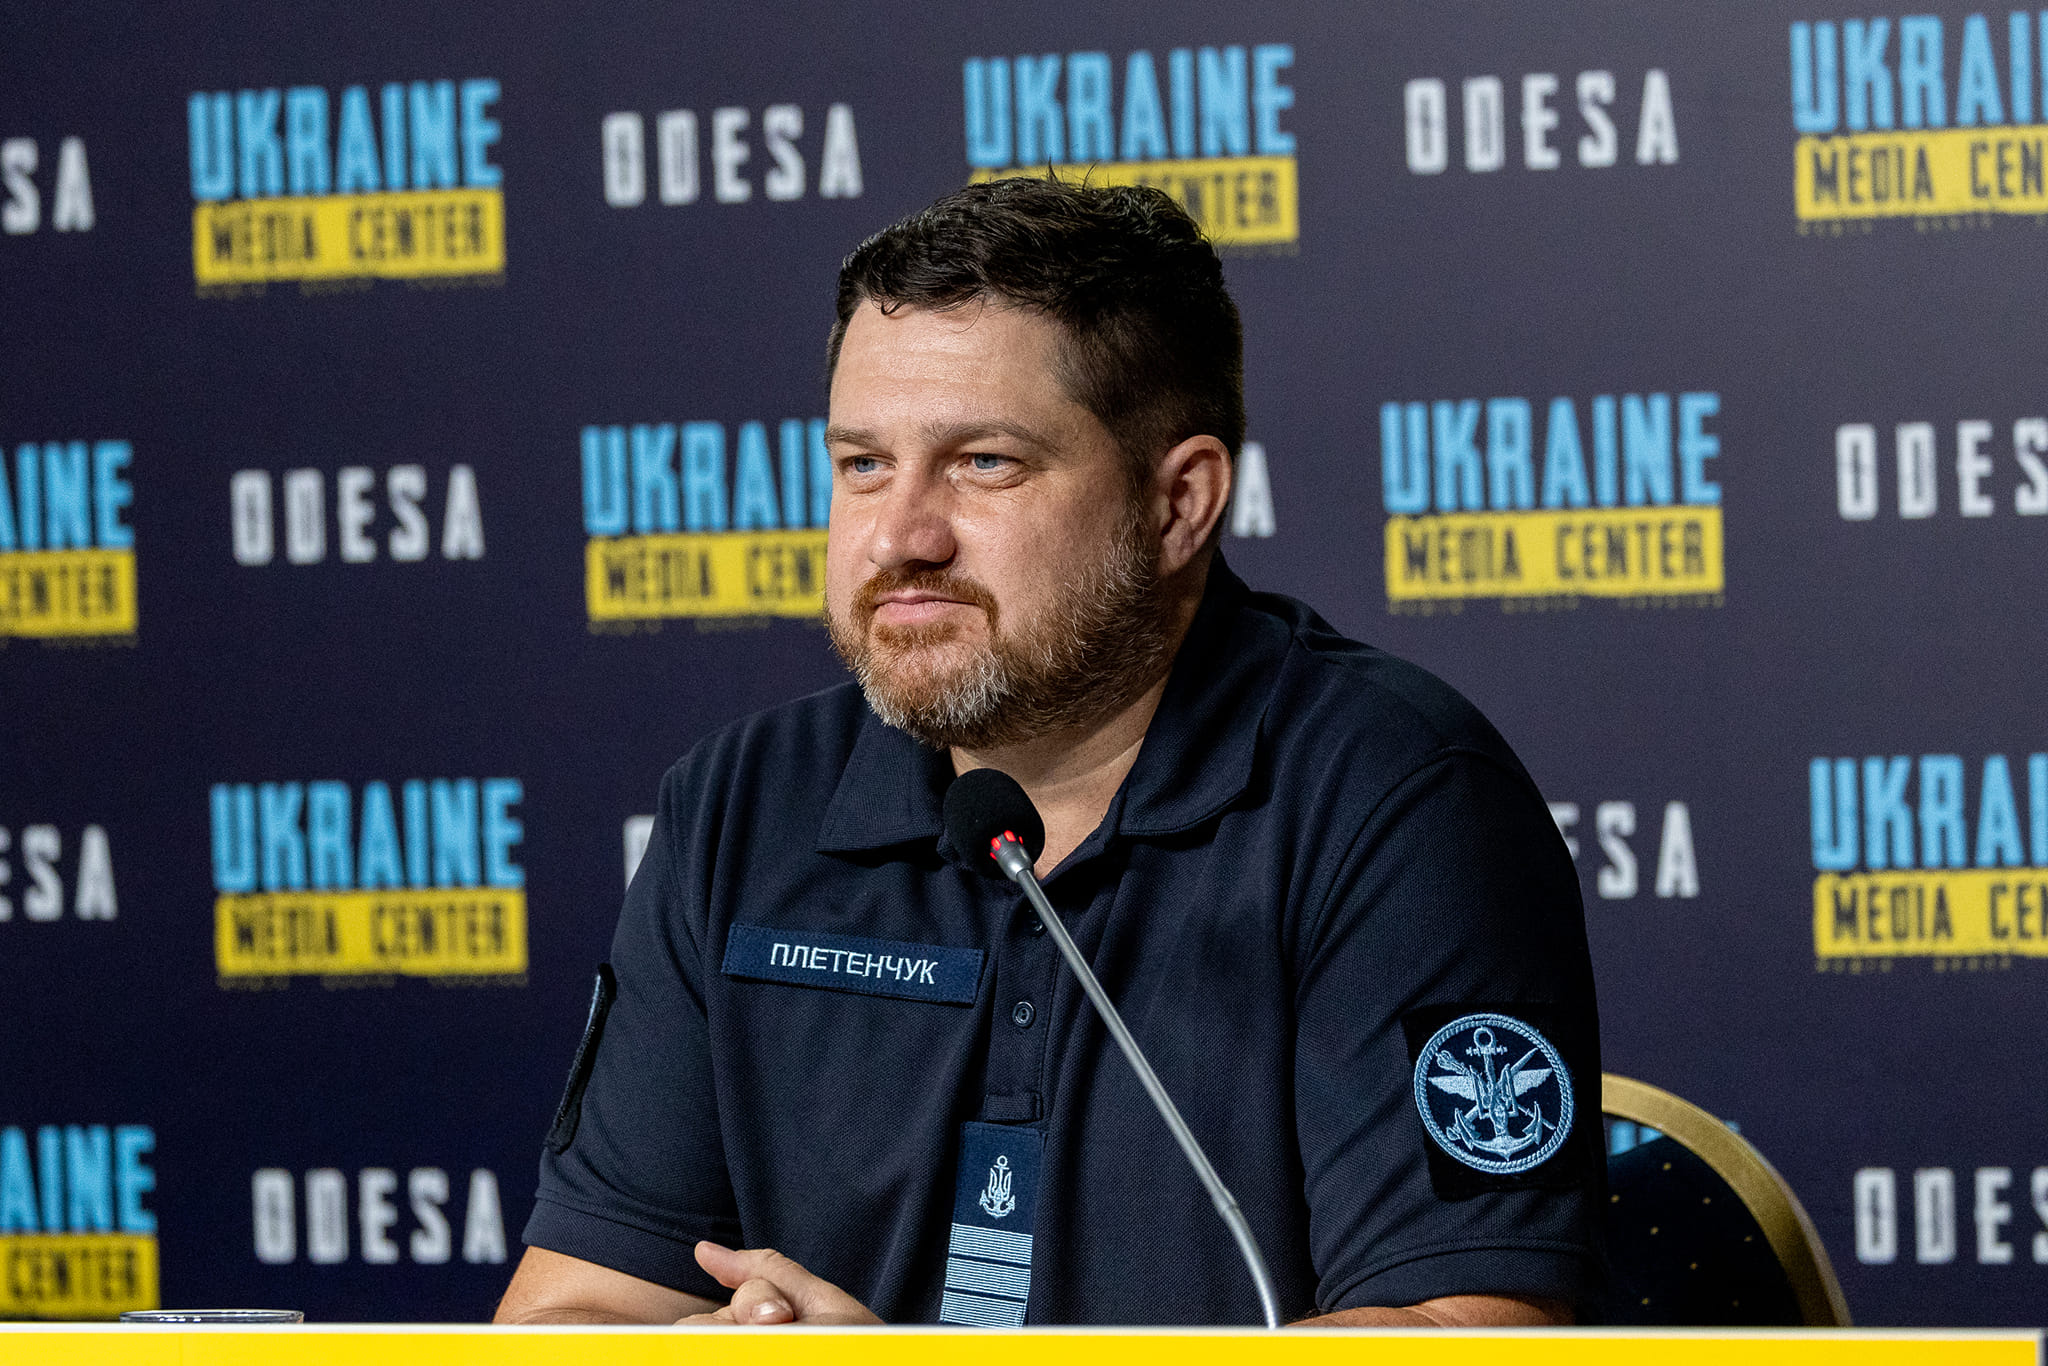 Dmytro Pletenchuk: In the waters of the Black Sea, there are currently no Russian ships